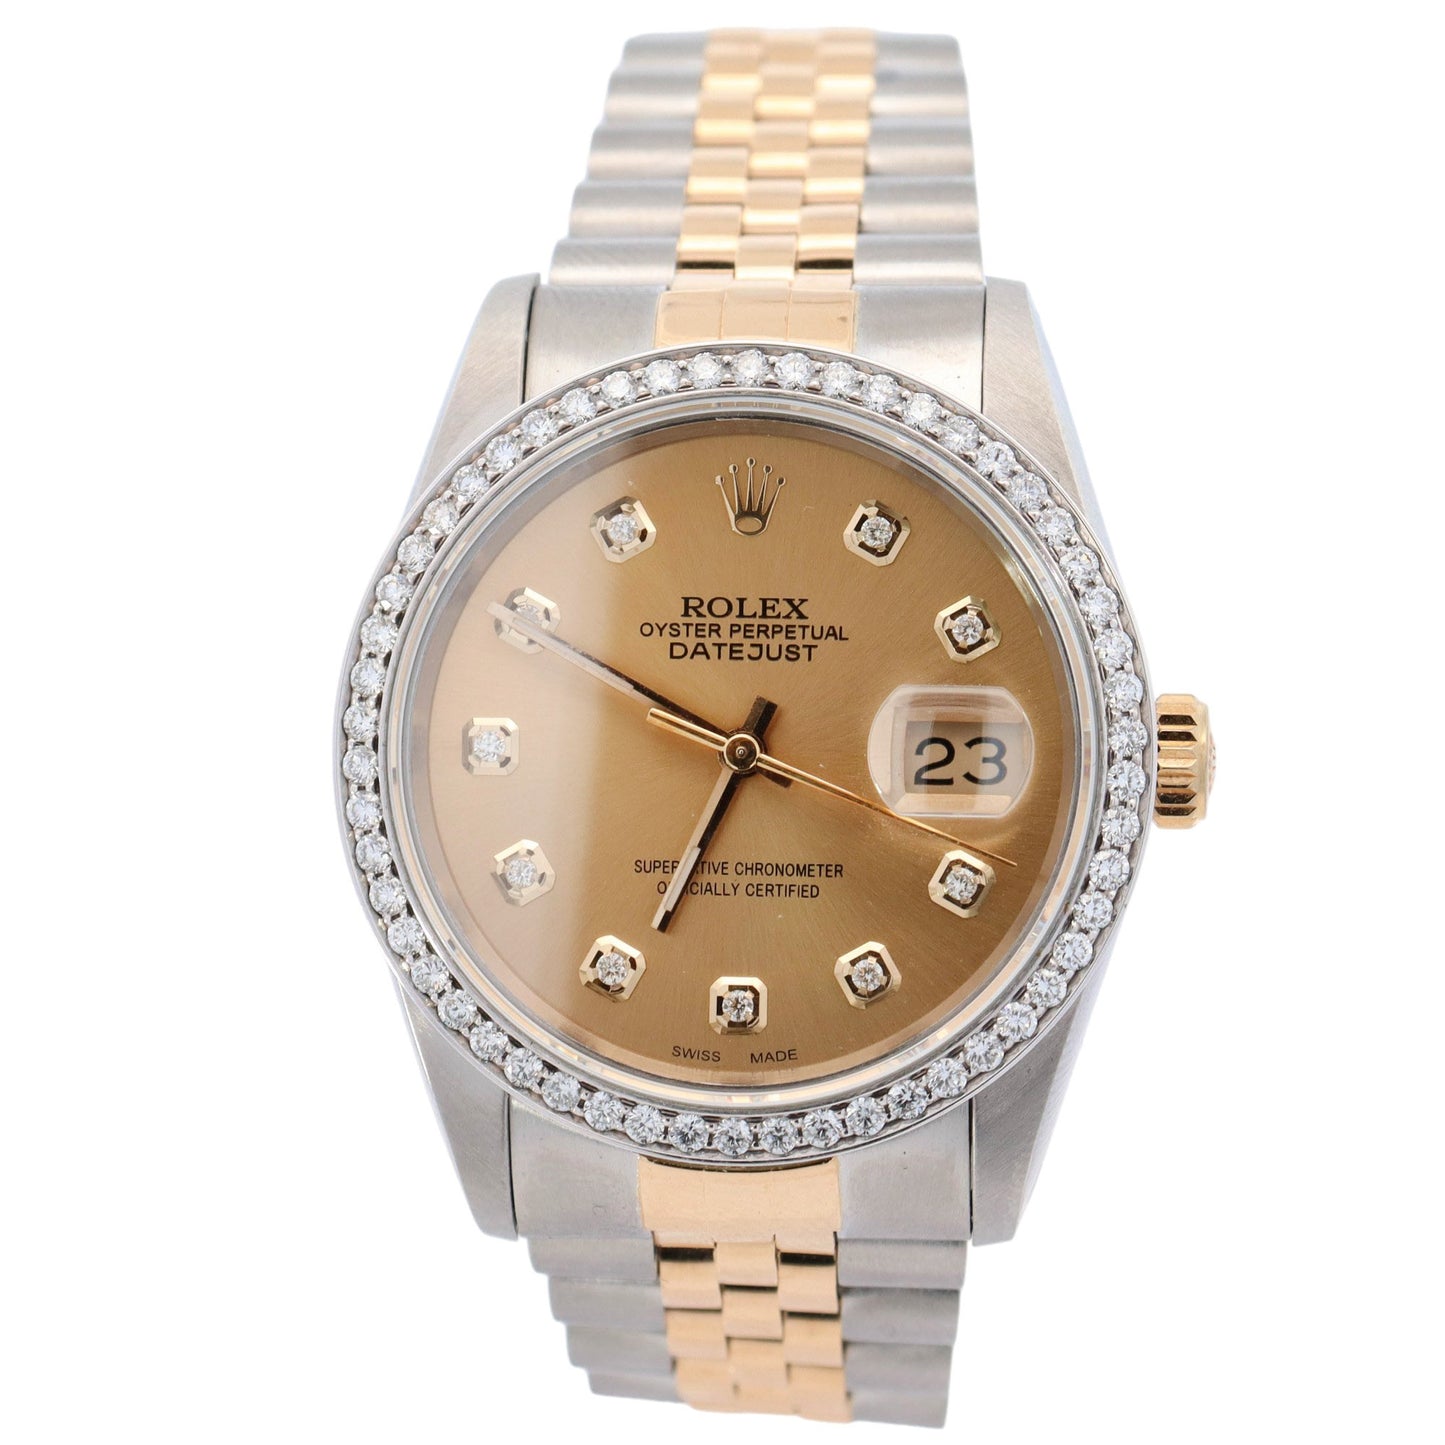 Rolex Datejust TT Steel and Yellow Gold 36mm Champagne Diamond Dial Watch Reference #: 16233 - Happy Jewelers Fine Jewelry Lifetime Warranty